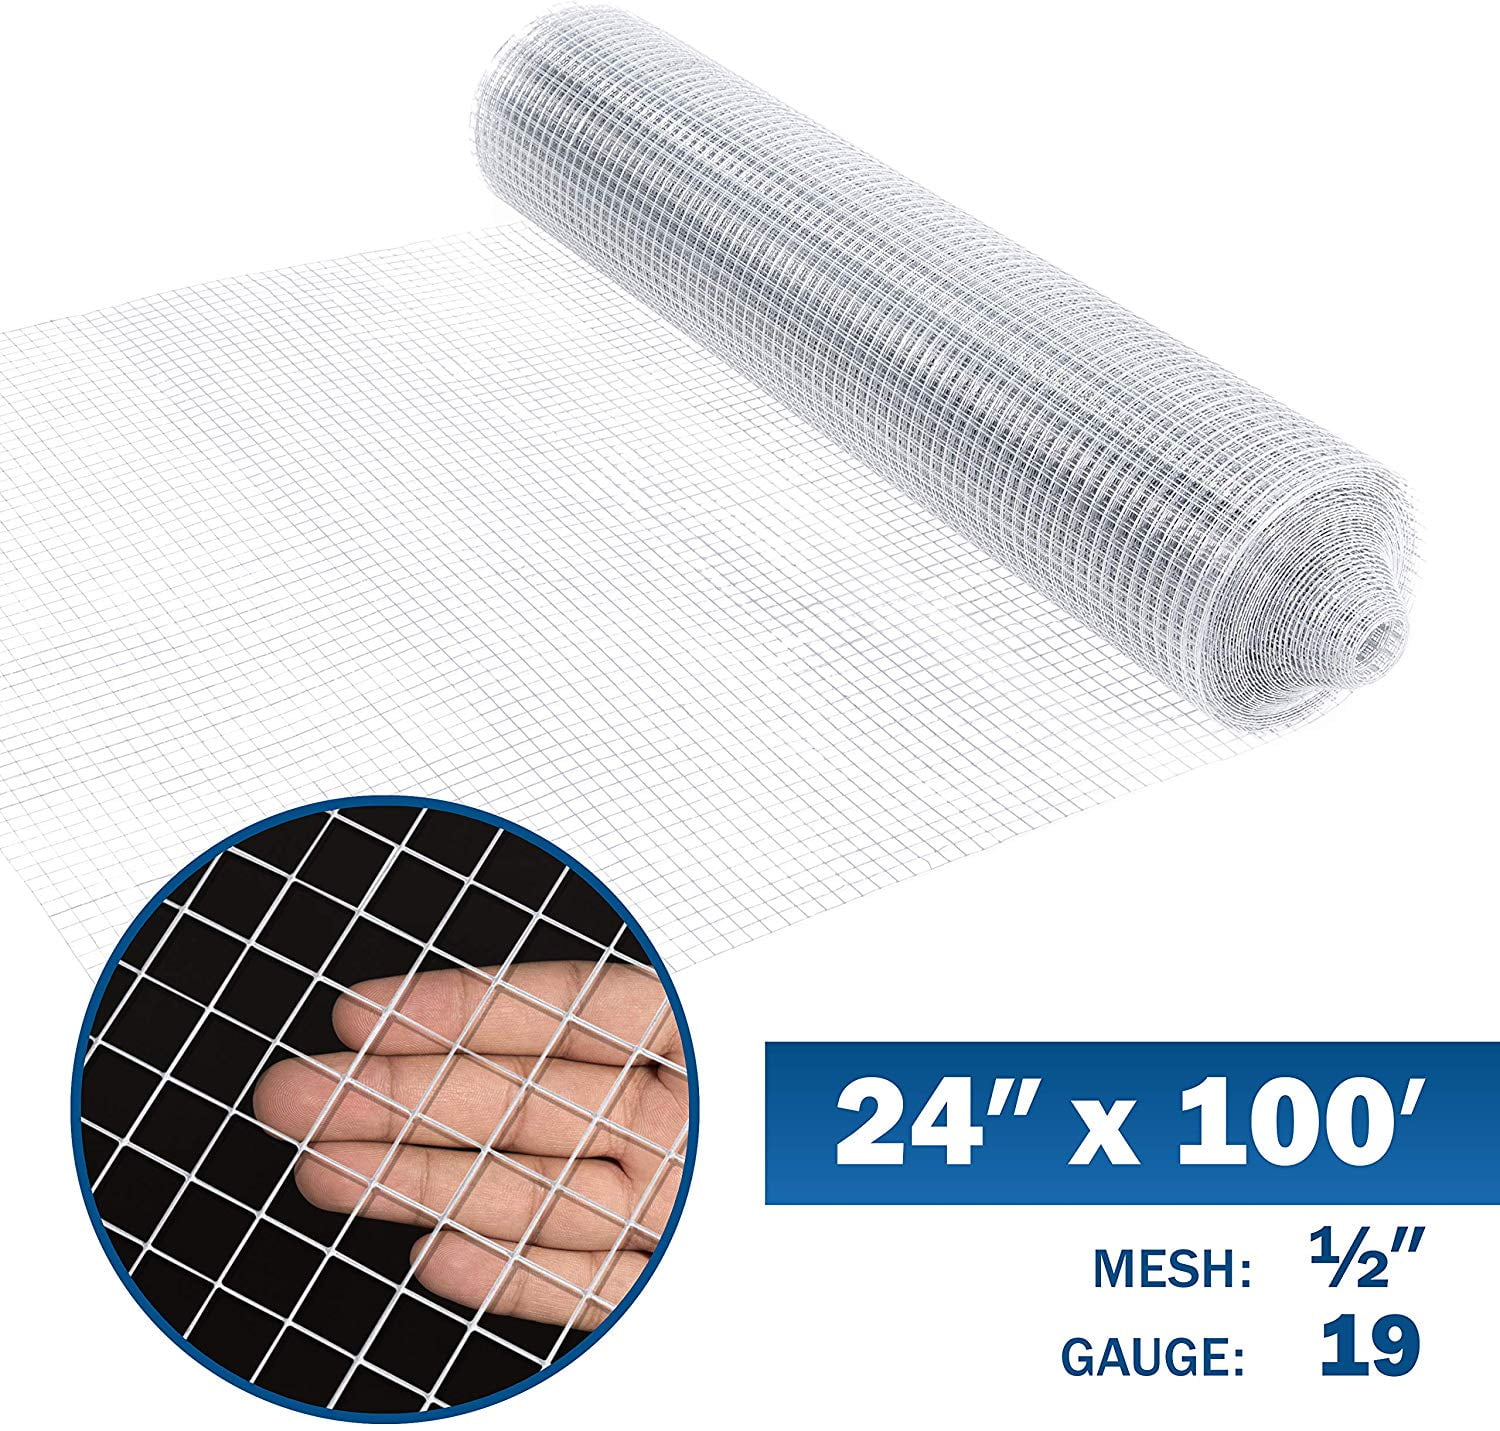 Best Choice Products 3x50ft Multipurpose 19-Gauge Galvanized Welded Chicken Wire Mesh Fence Netting w/ 0.5in openings